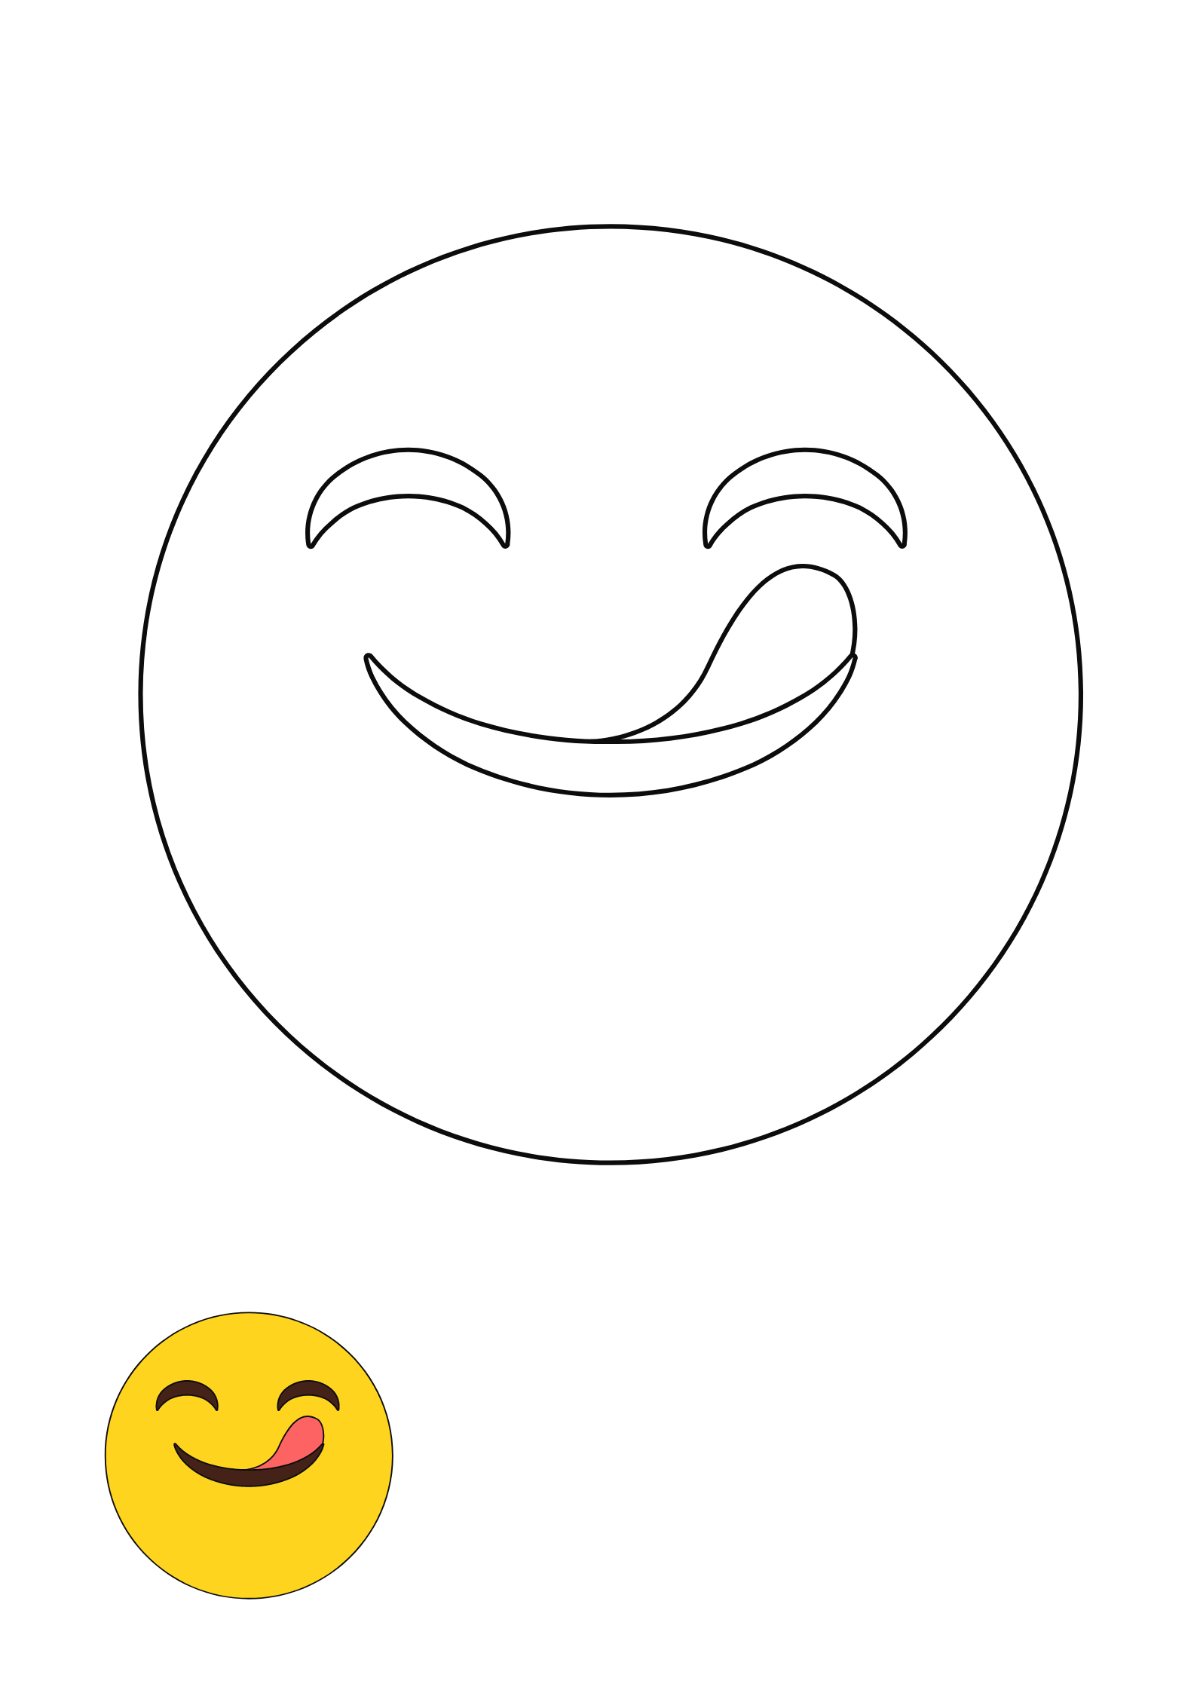 Yummy Smiley coloring page Template